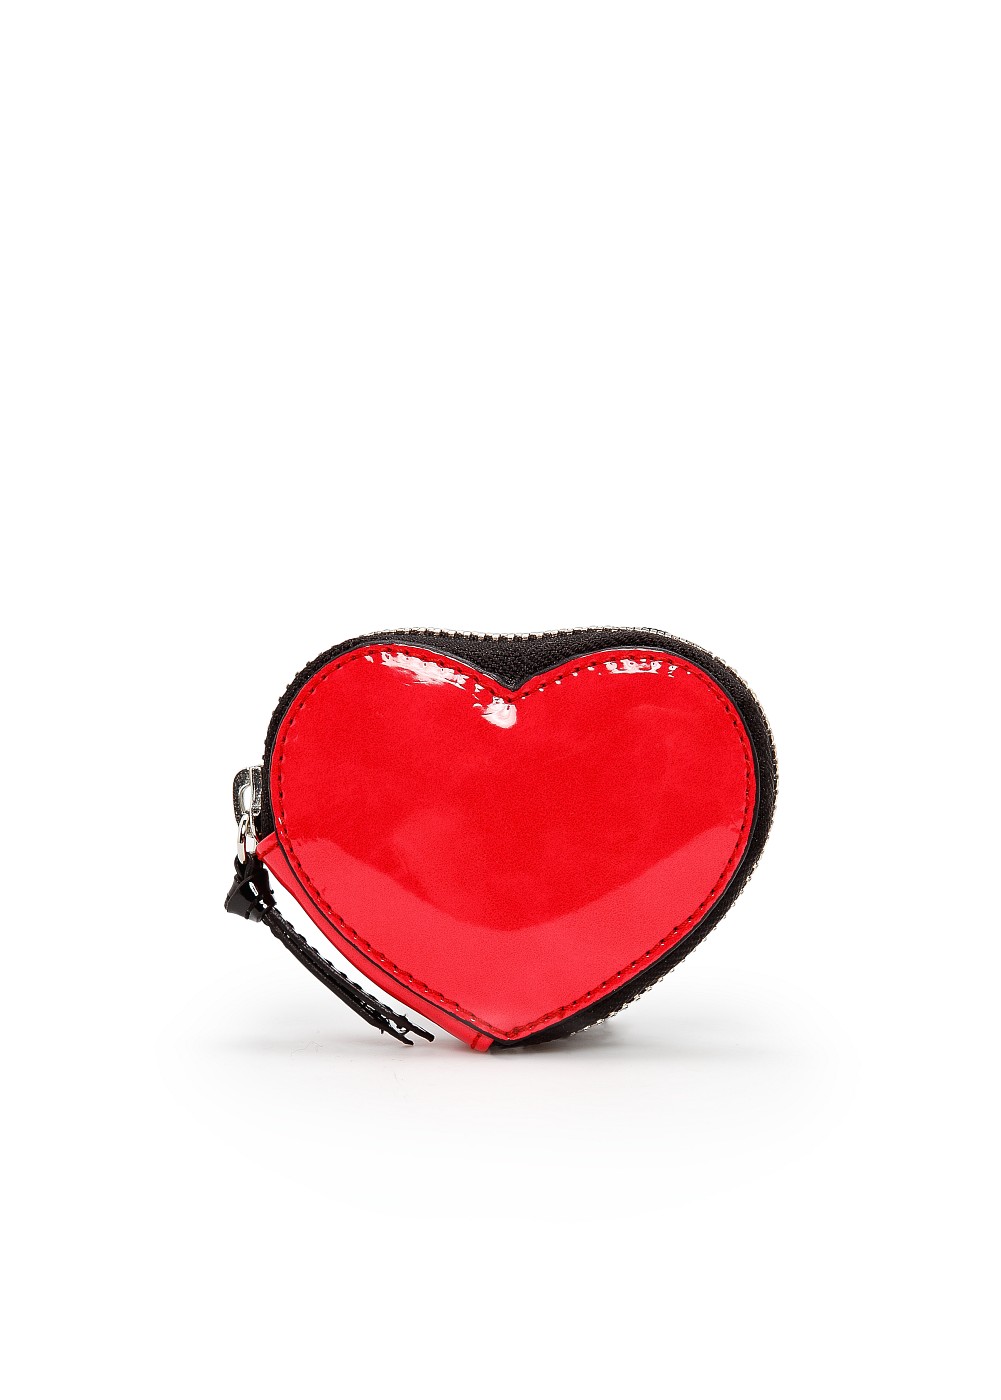 Lyst - Mango Heart Shaped Coin Purse in Red